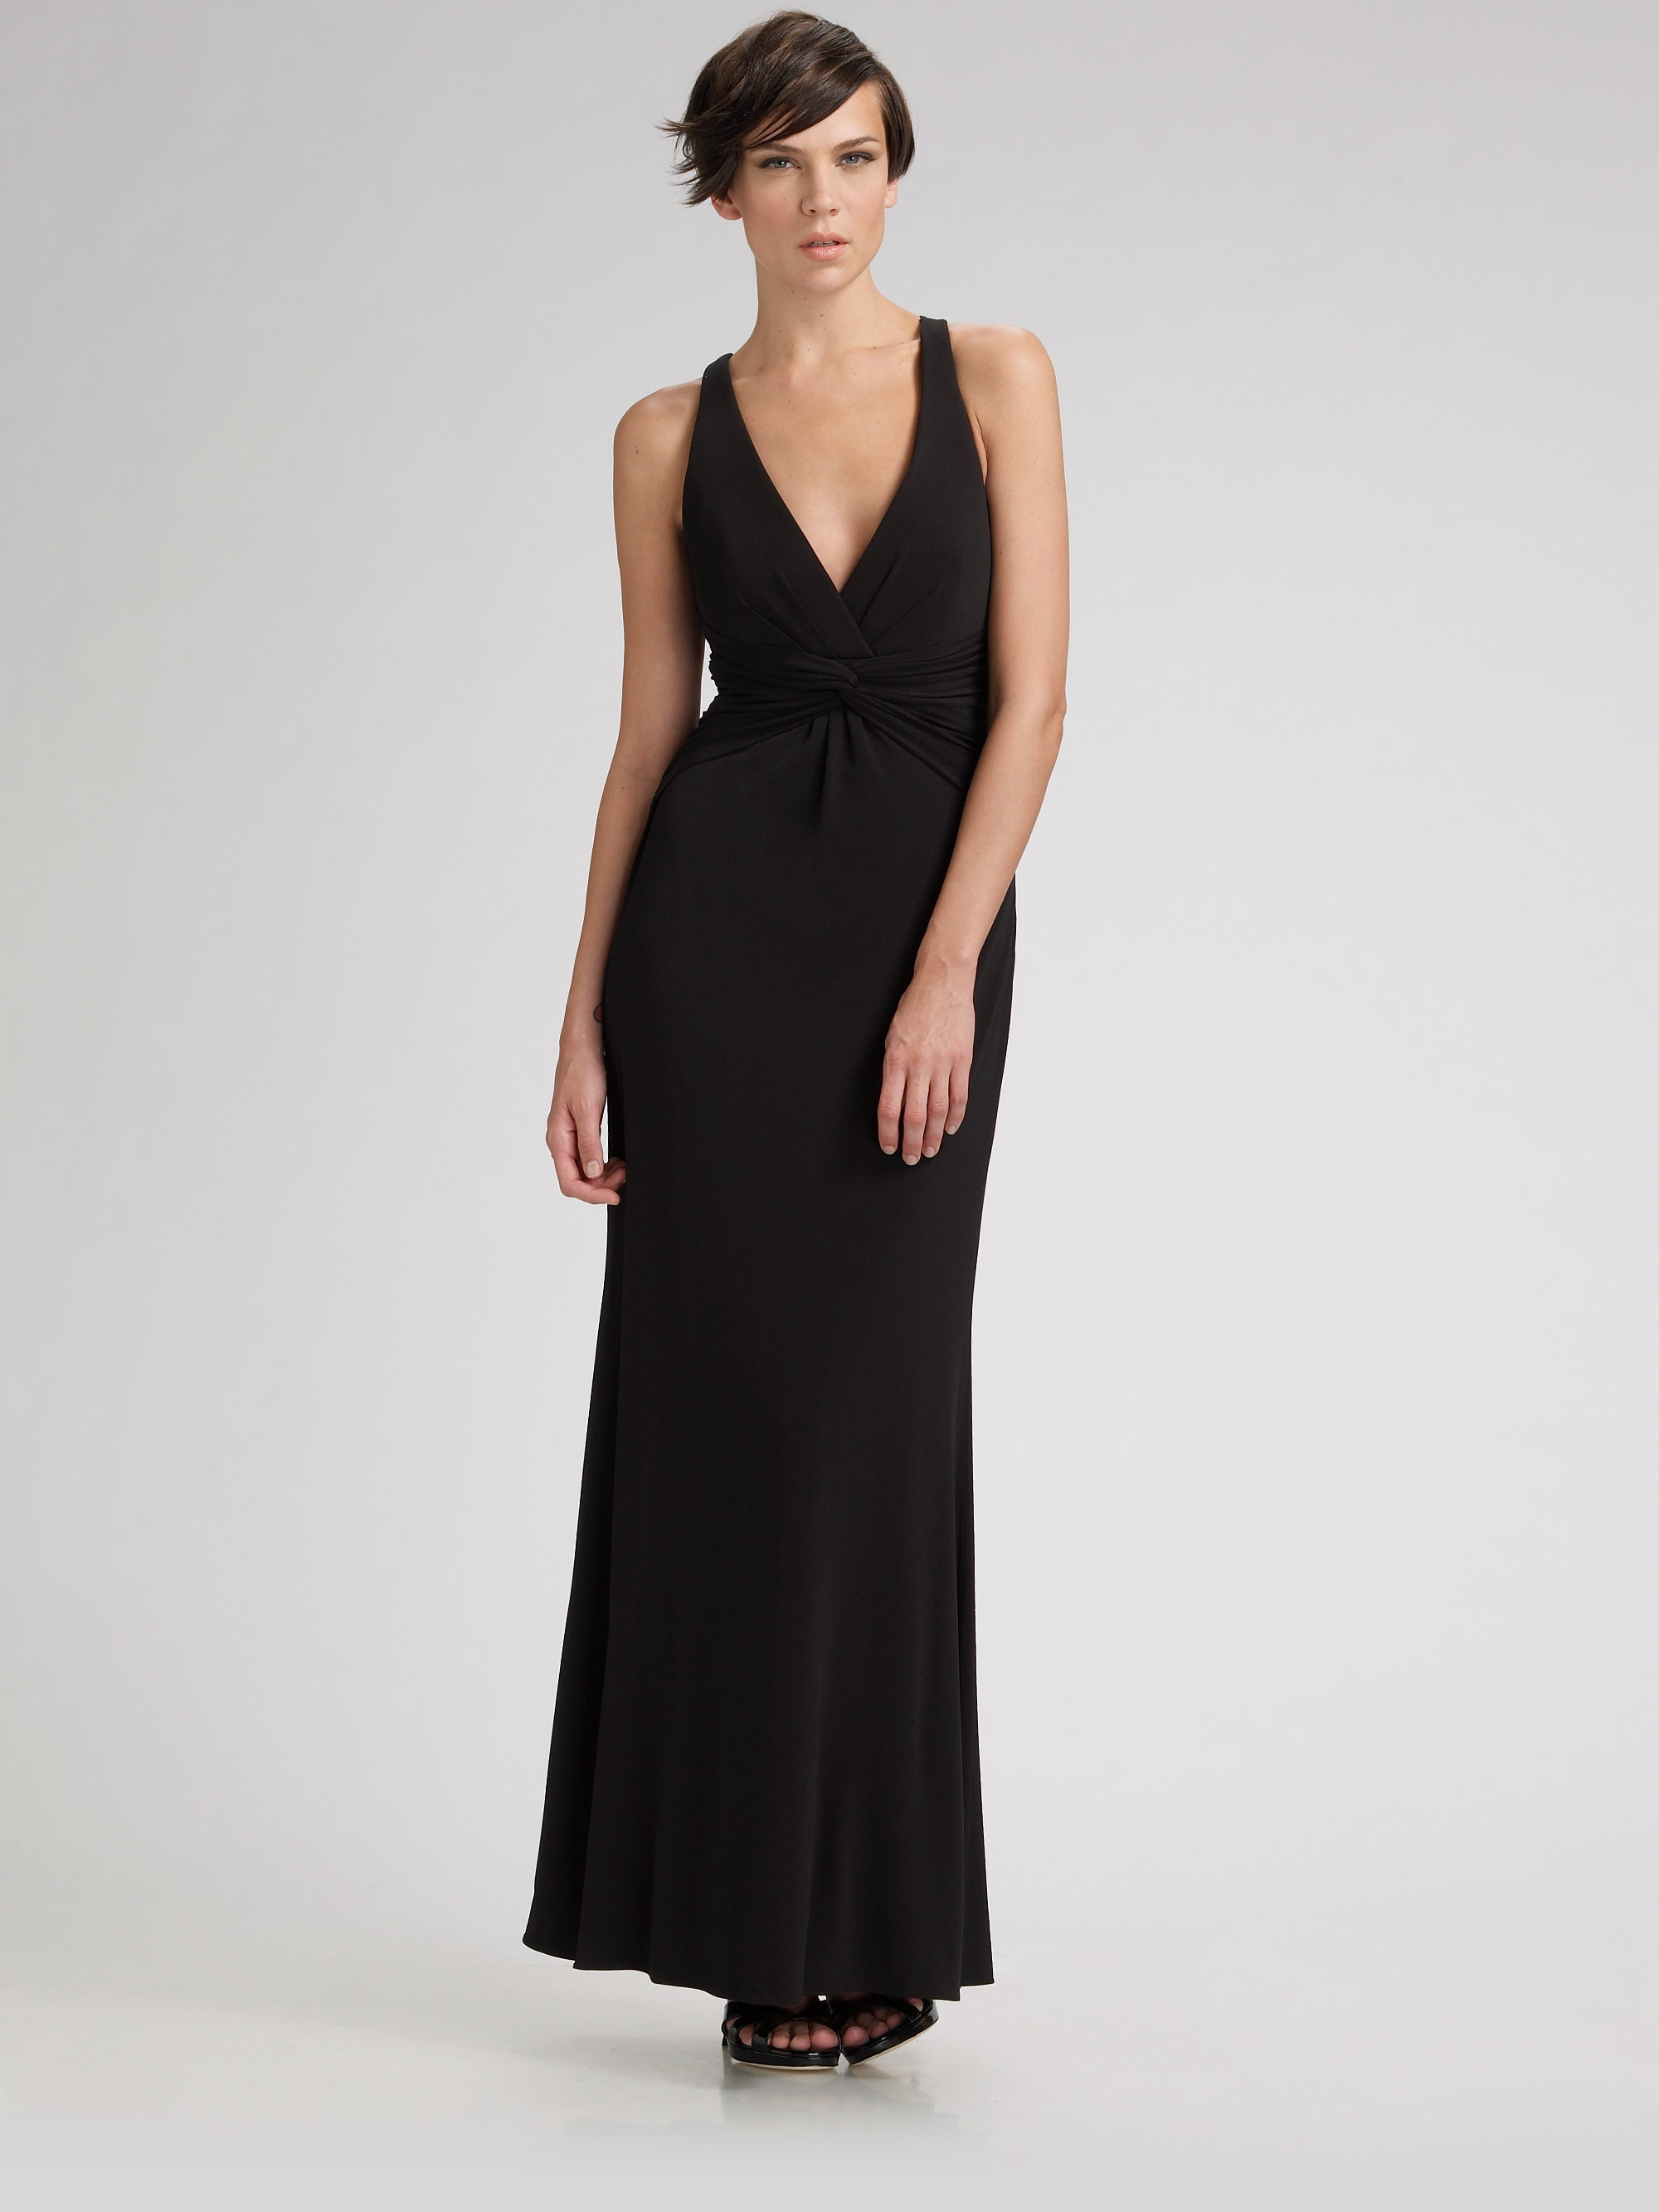 Laundry by shelli segal Halter Matte Jersey Gown in Black | Lyst